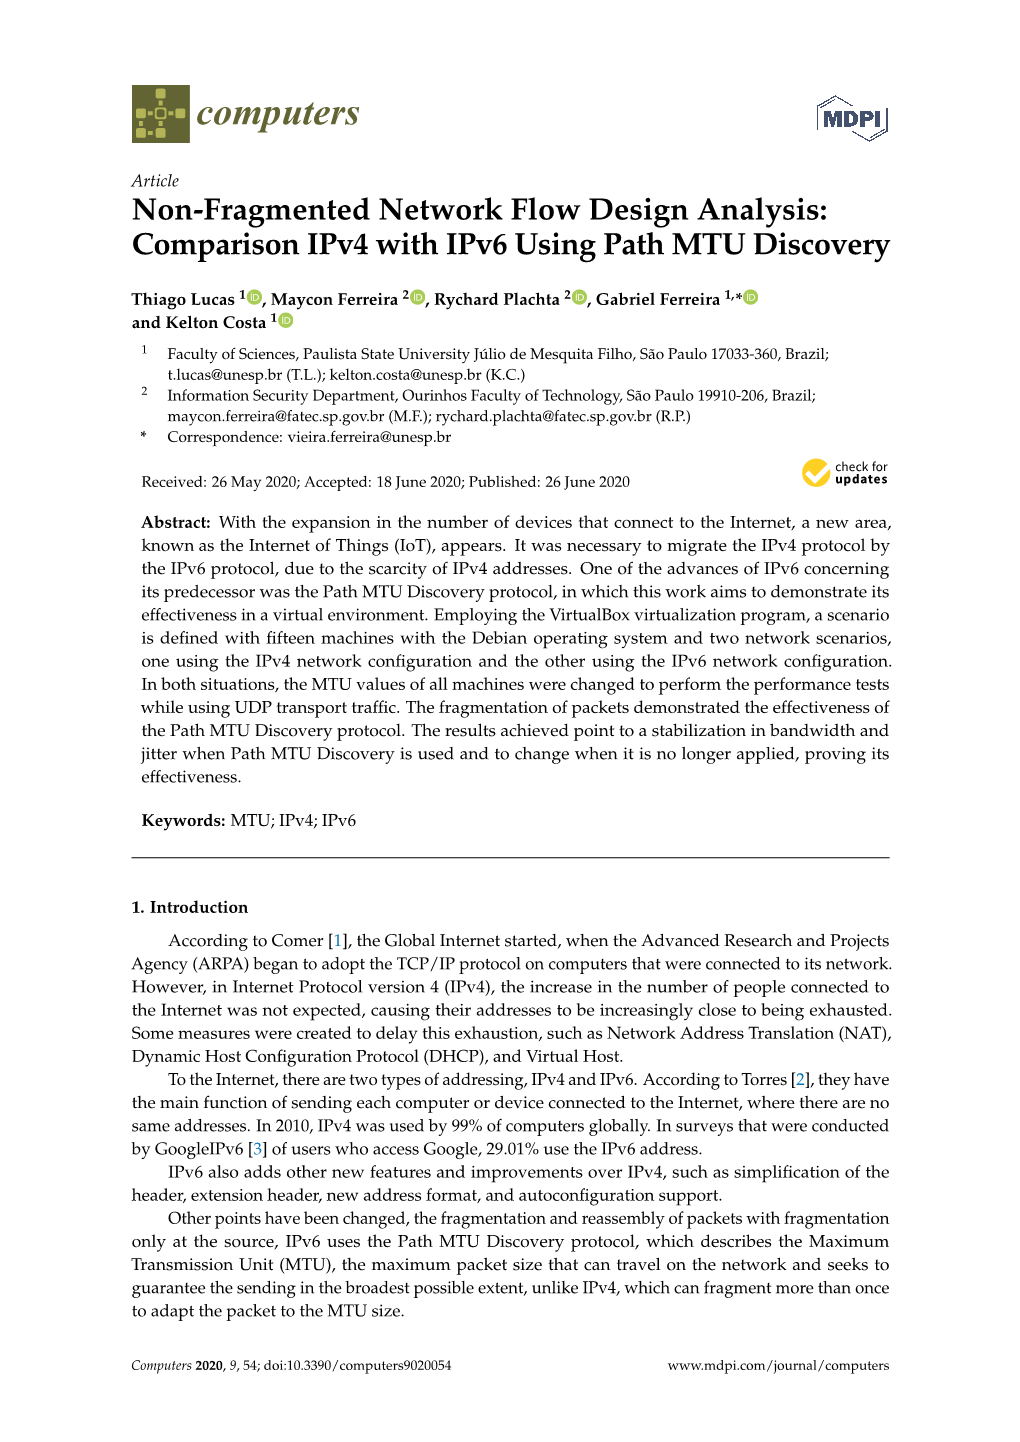 Non-Fragmented Network Flow Design Analysis: Comparison Ipv4 with Ipv6 Using Path MTU Discovery